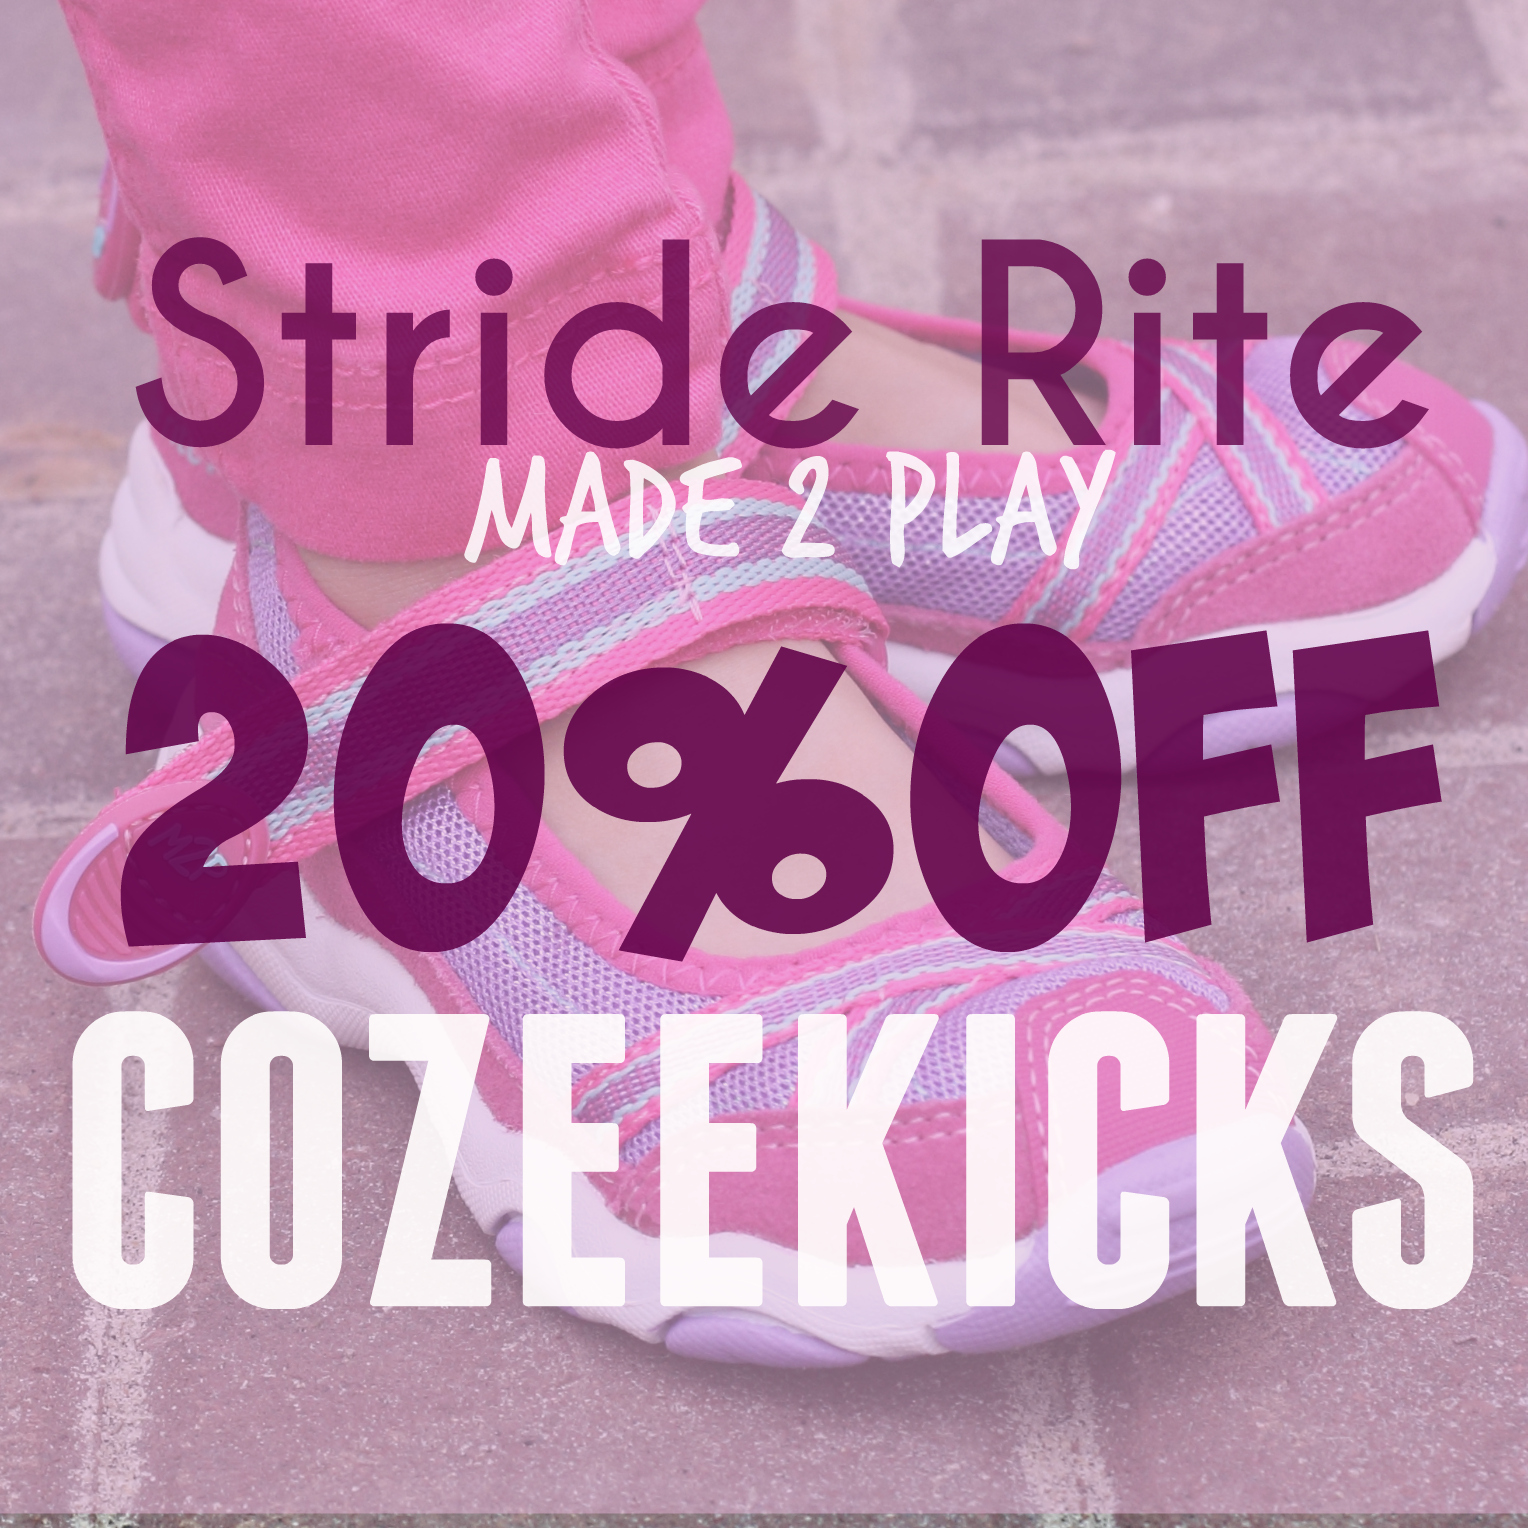 You can also find more about Stride Rite shoes by visiting their ...